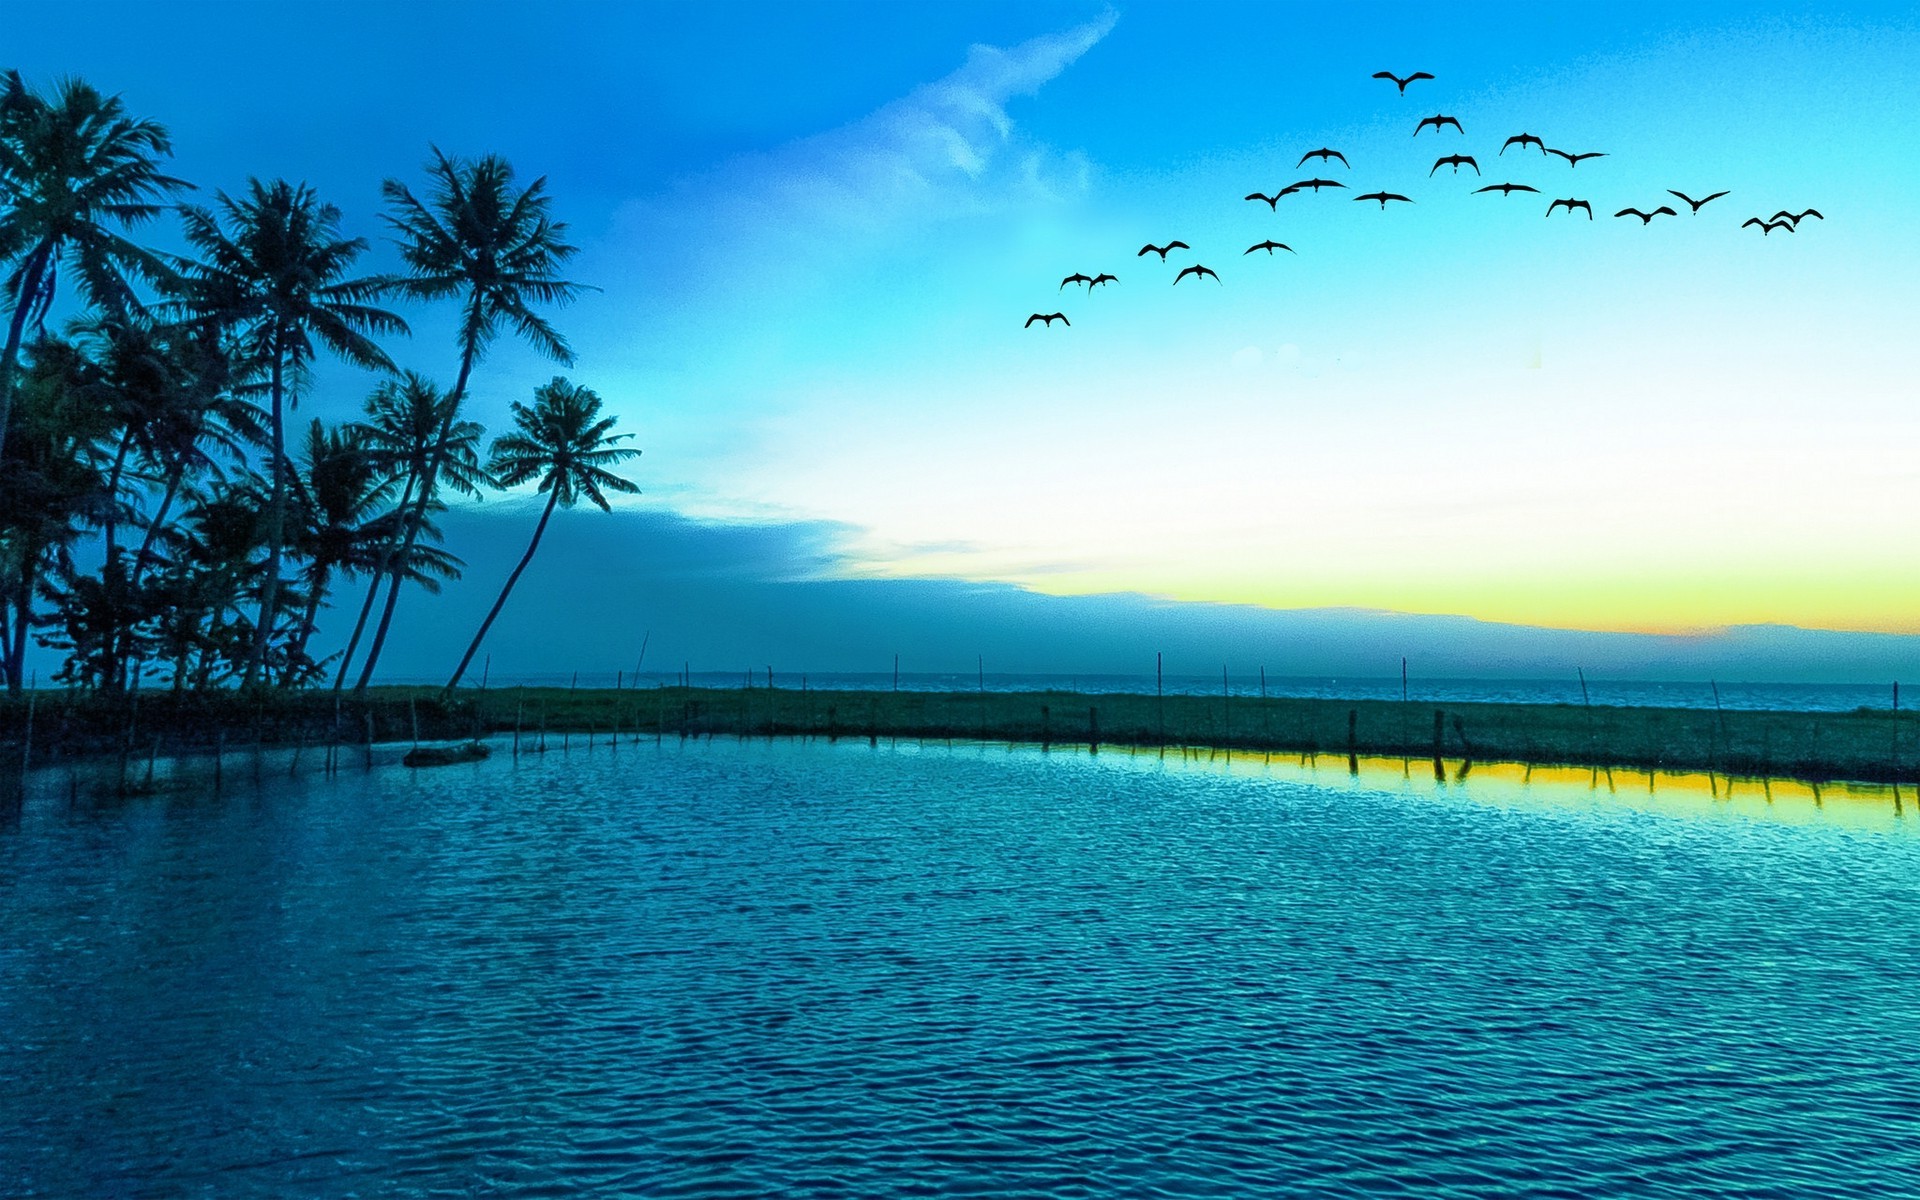 Sunrise With Flying Birds - HD Wallpaper 